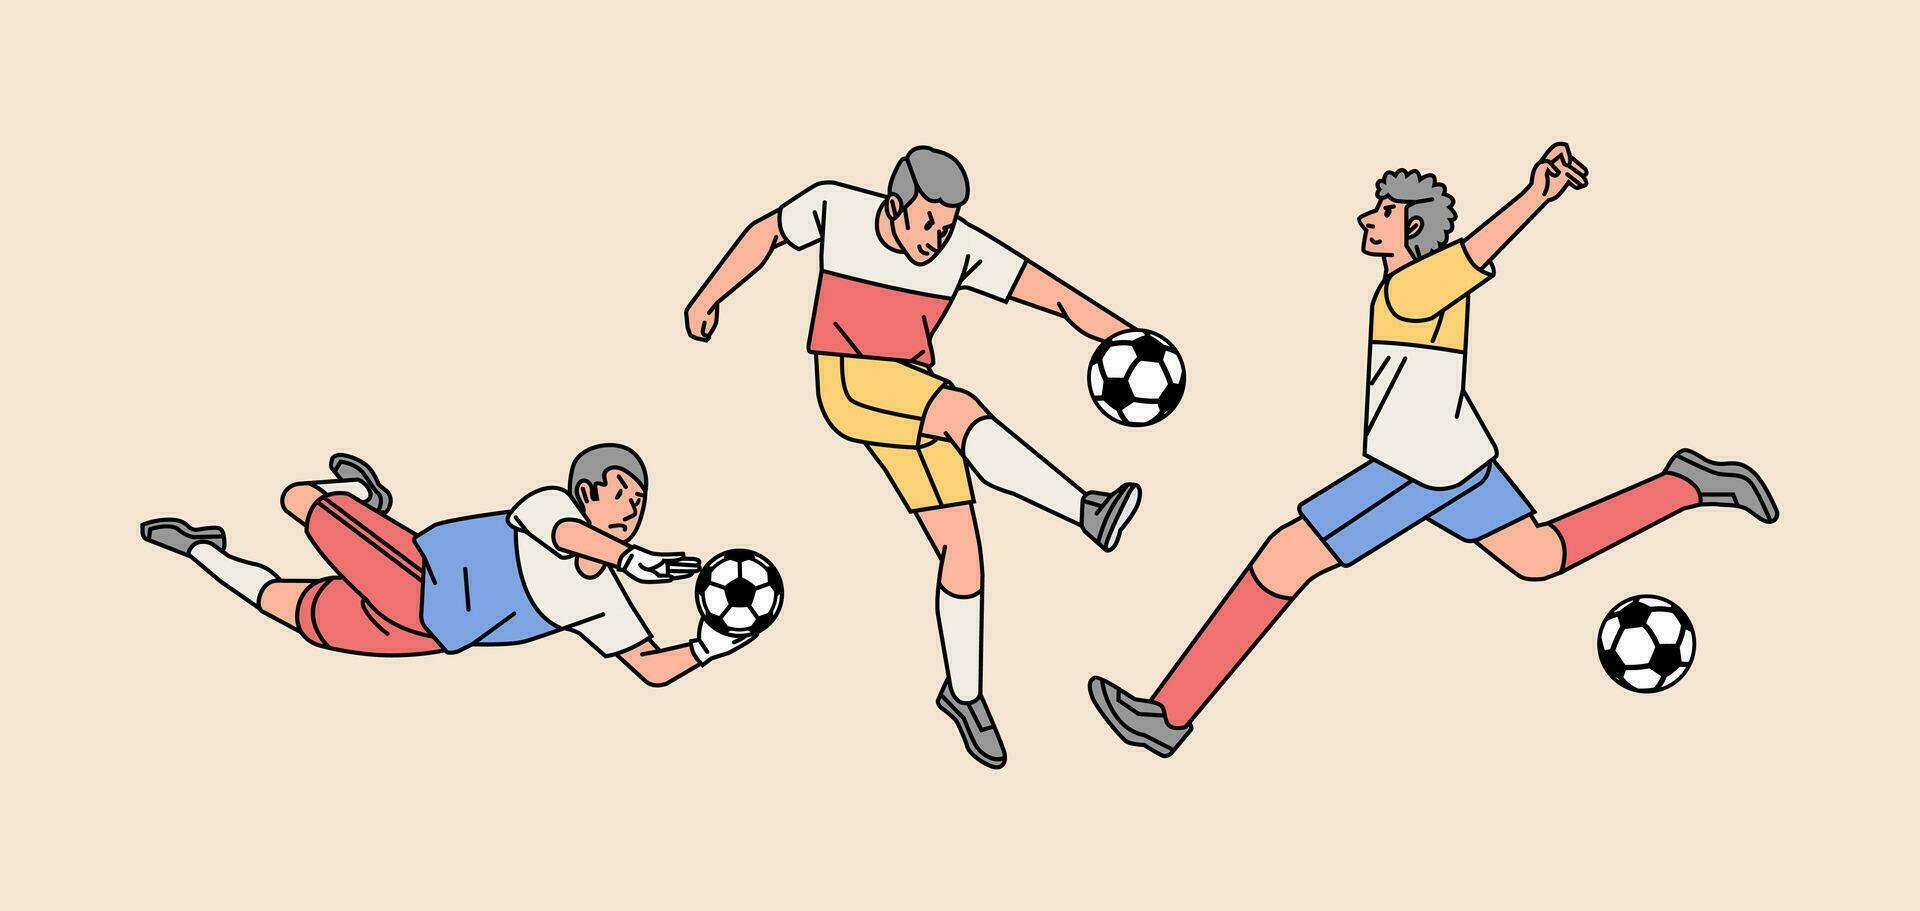 Soccer players character in action various poses set line style illustration vector